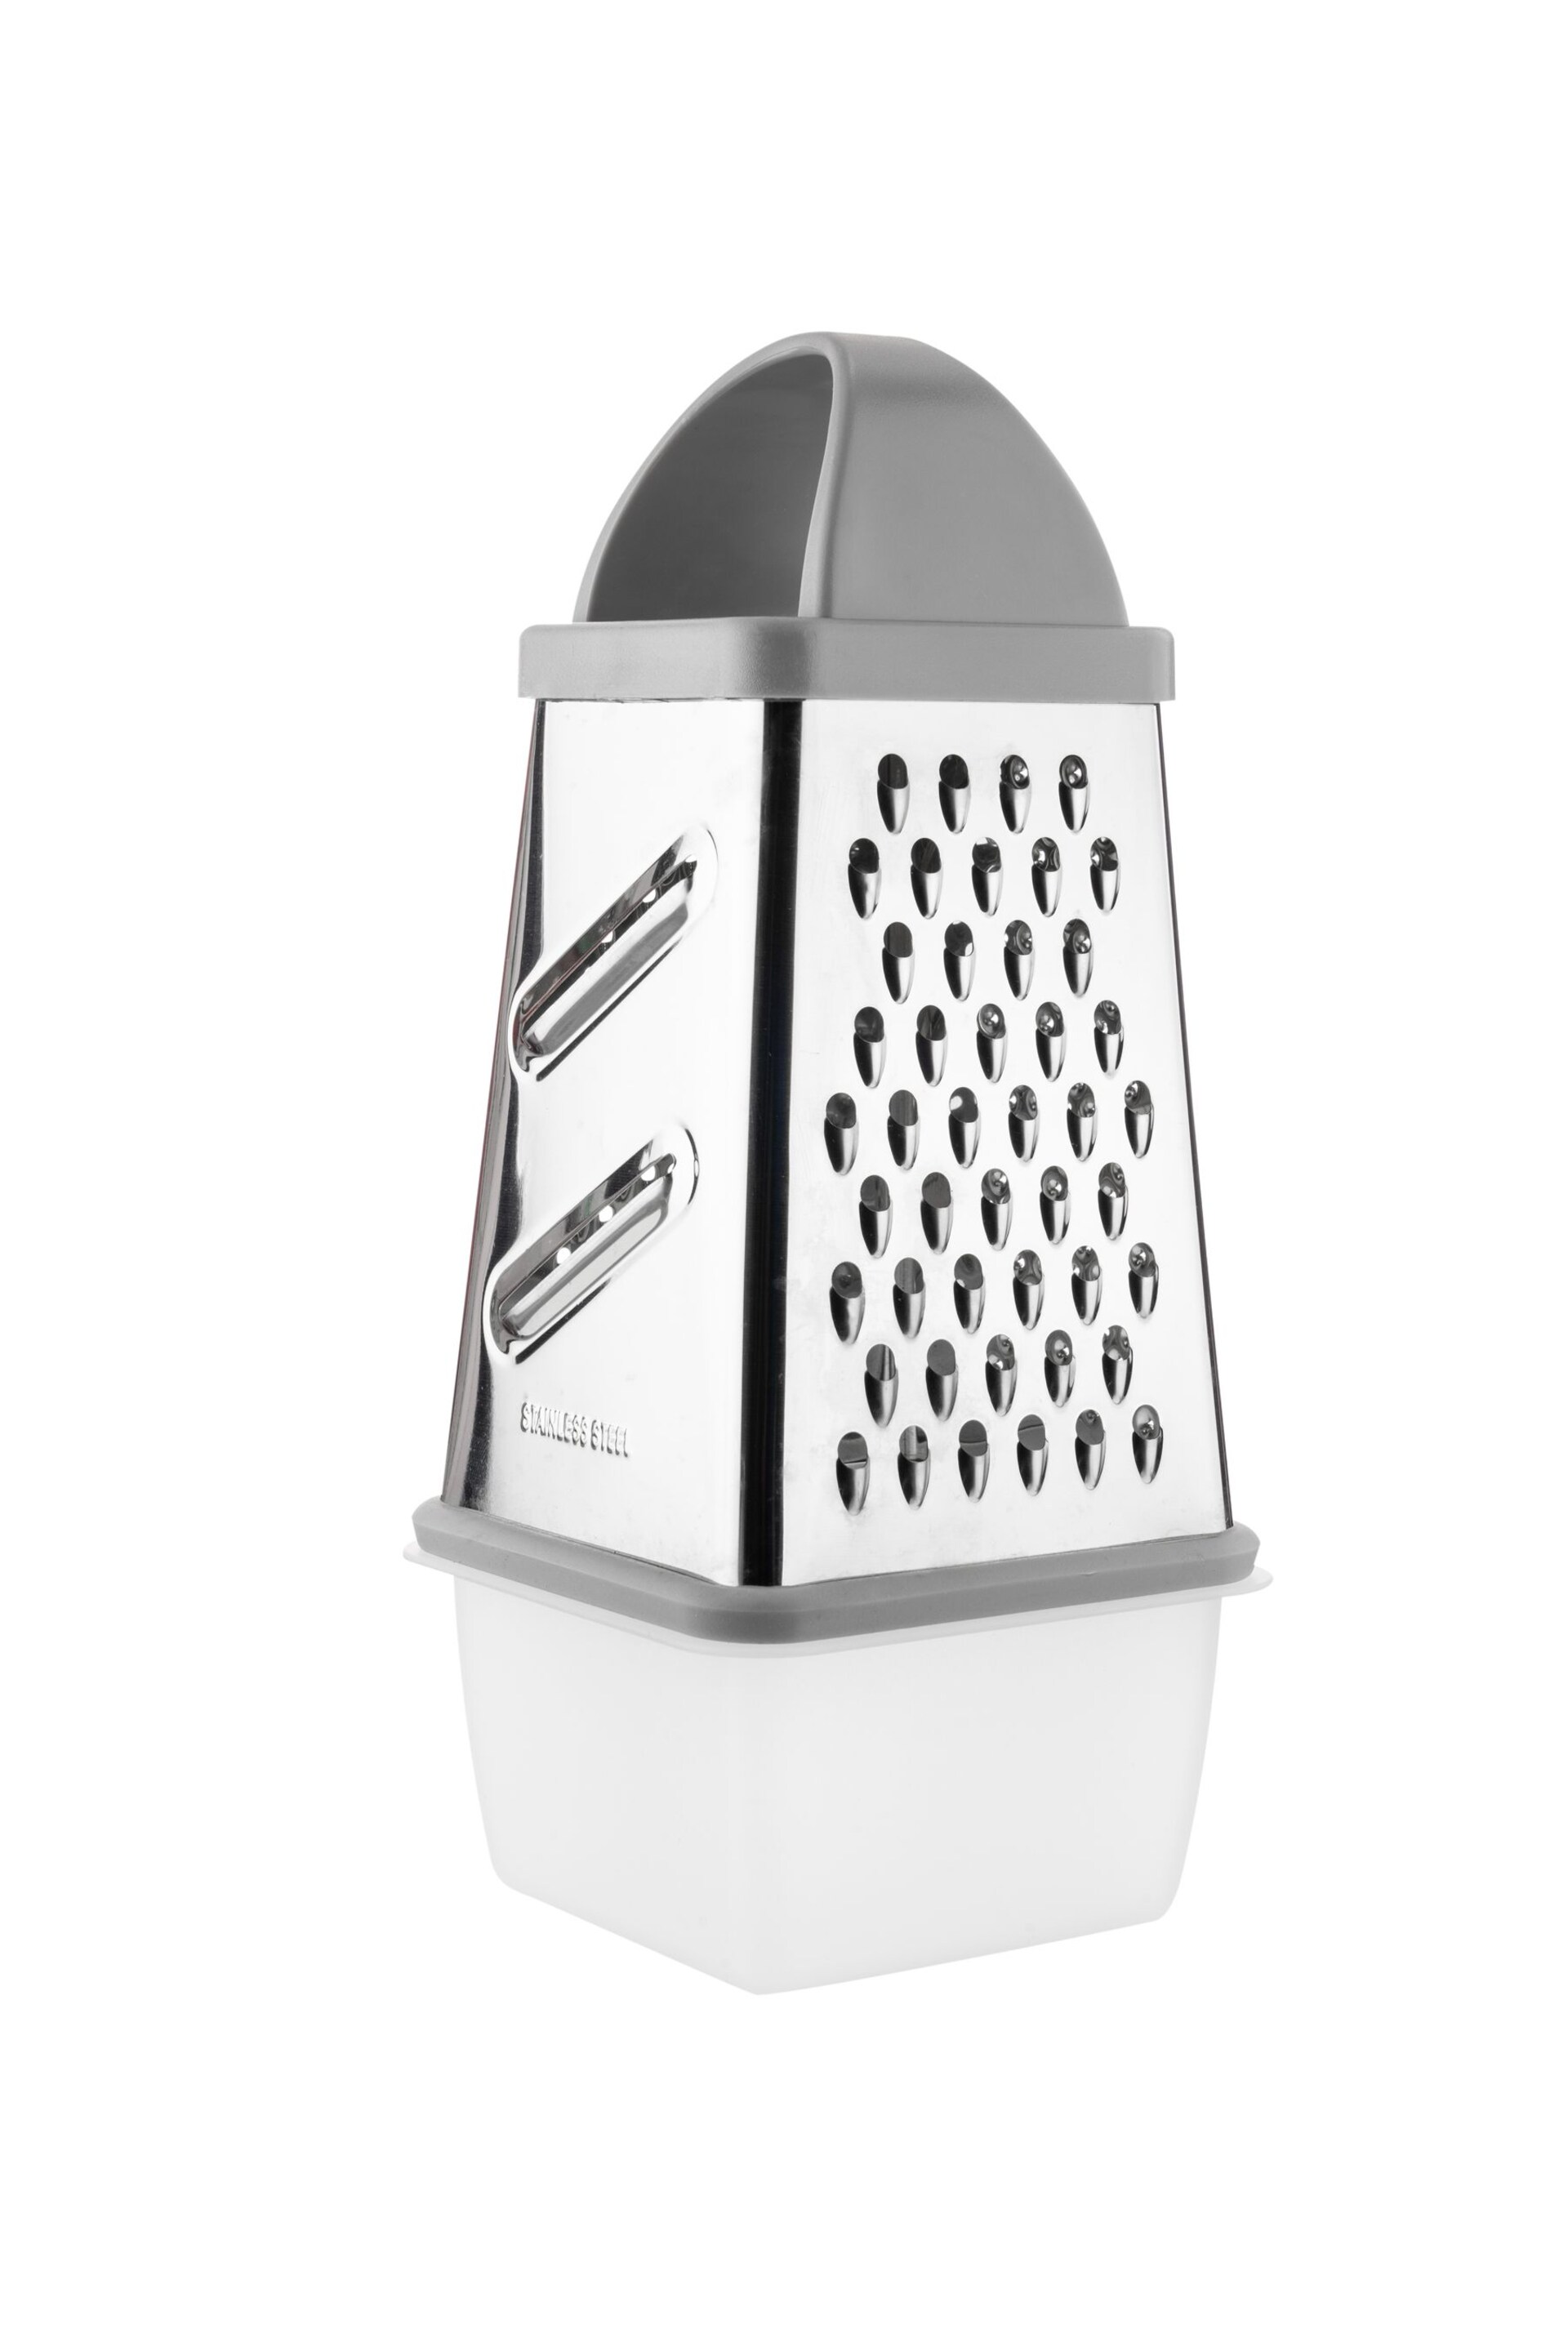 Fusion Black Grater - Image 4 of 4